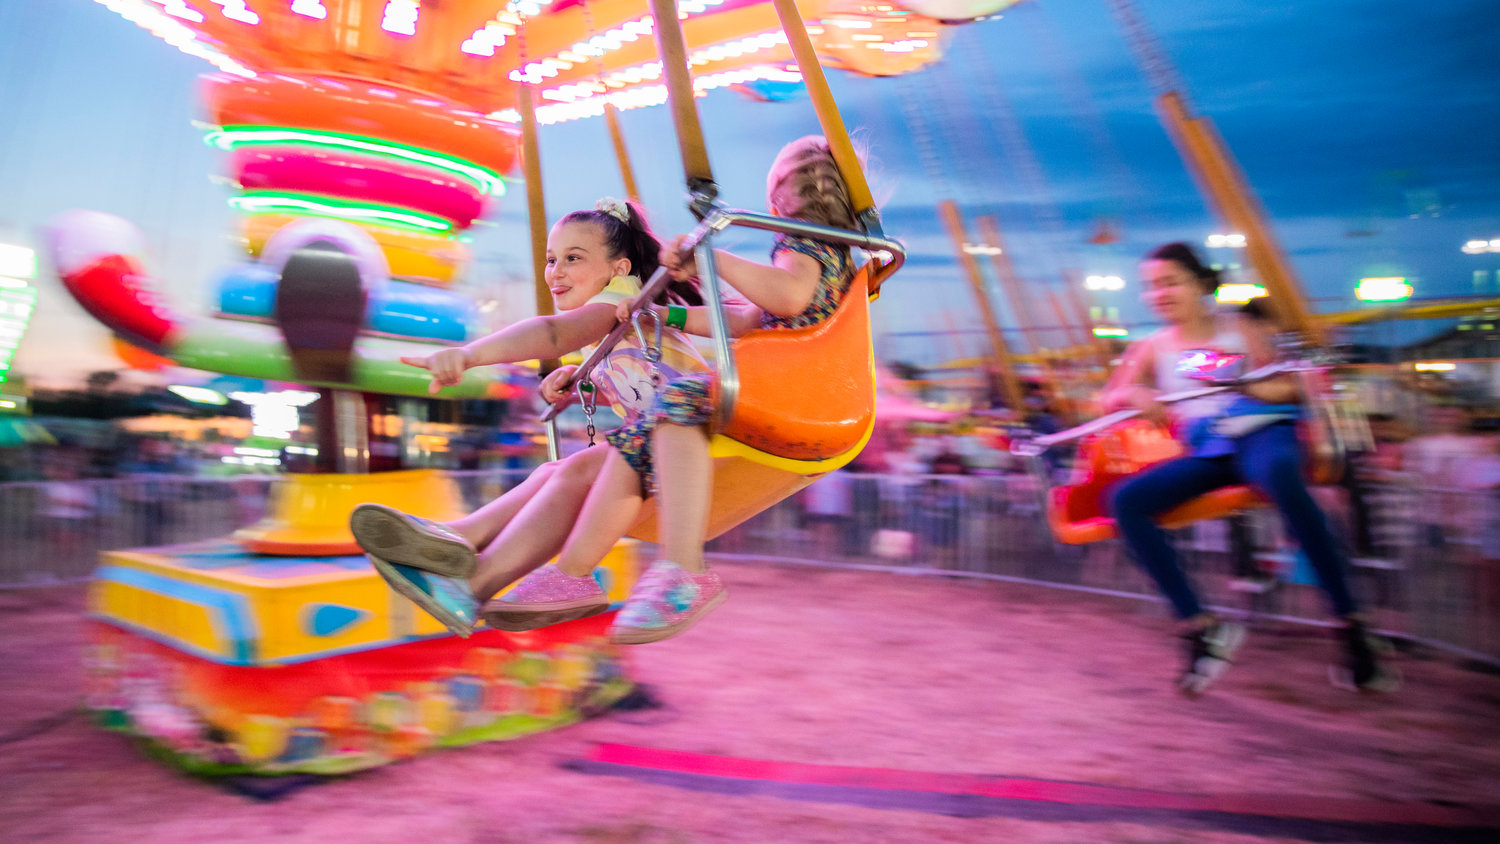 Violet Rogers, 9, of Boistfort, points on while spinning on a ride at the Southwest Washington Fairgrounds in August 2022.